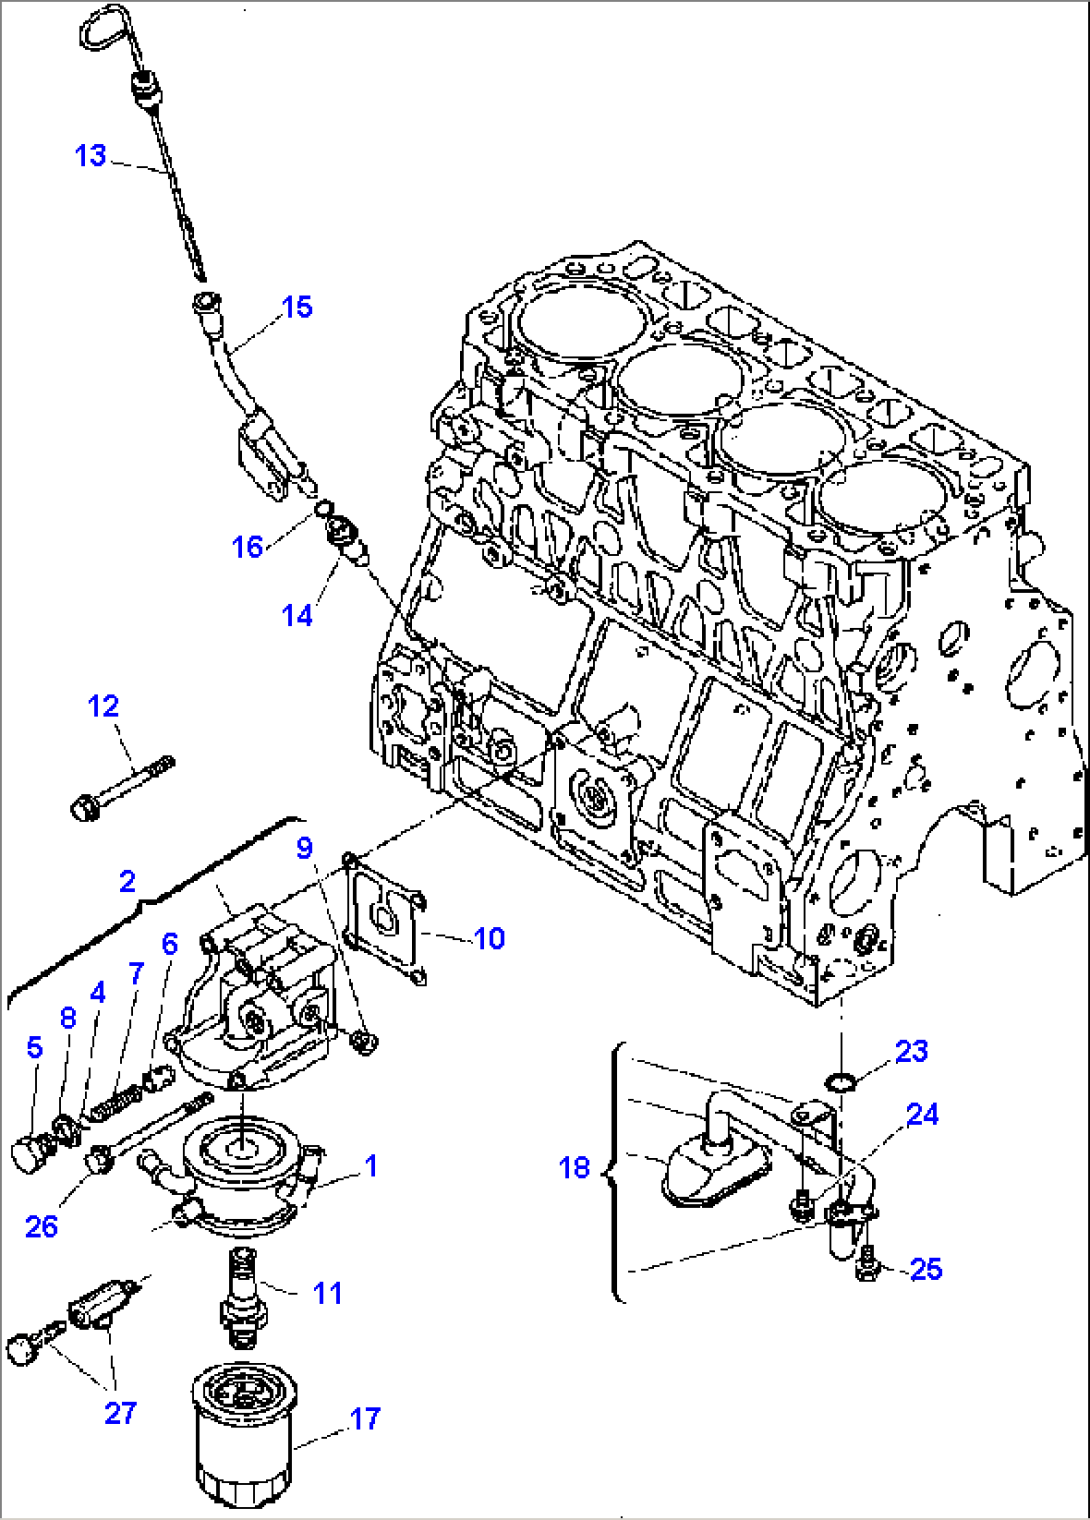 FIG. A0306-01A0 LUBRICATING OIL SYSTEM - TURBO ENGINE